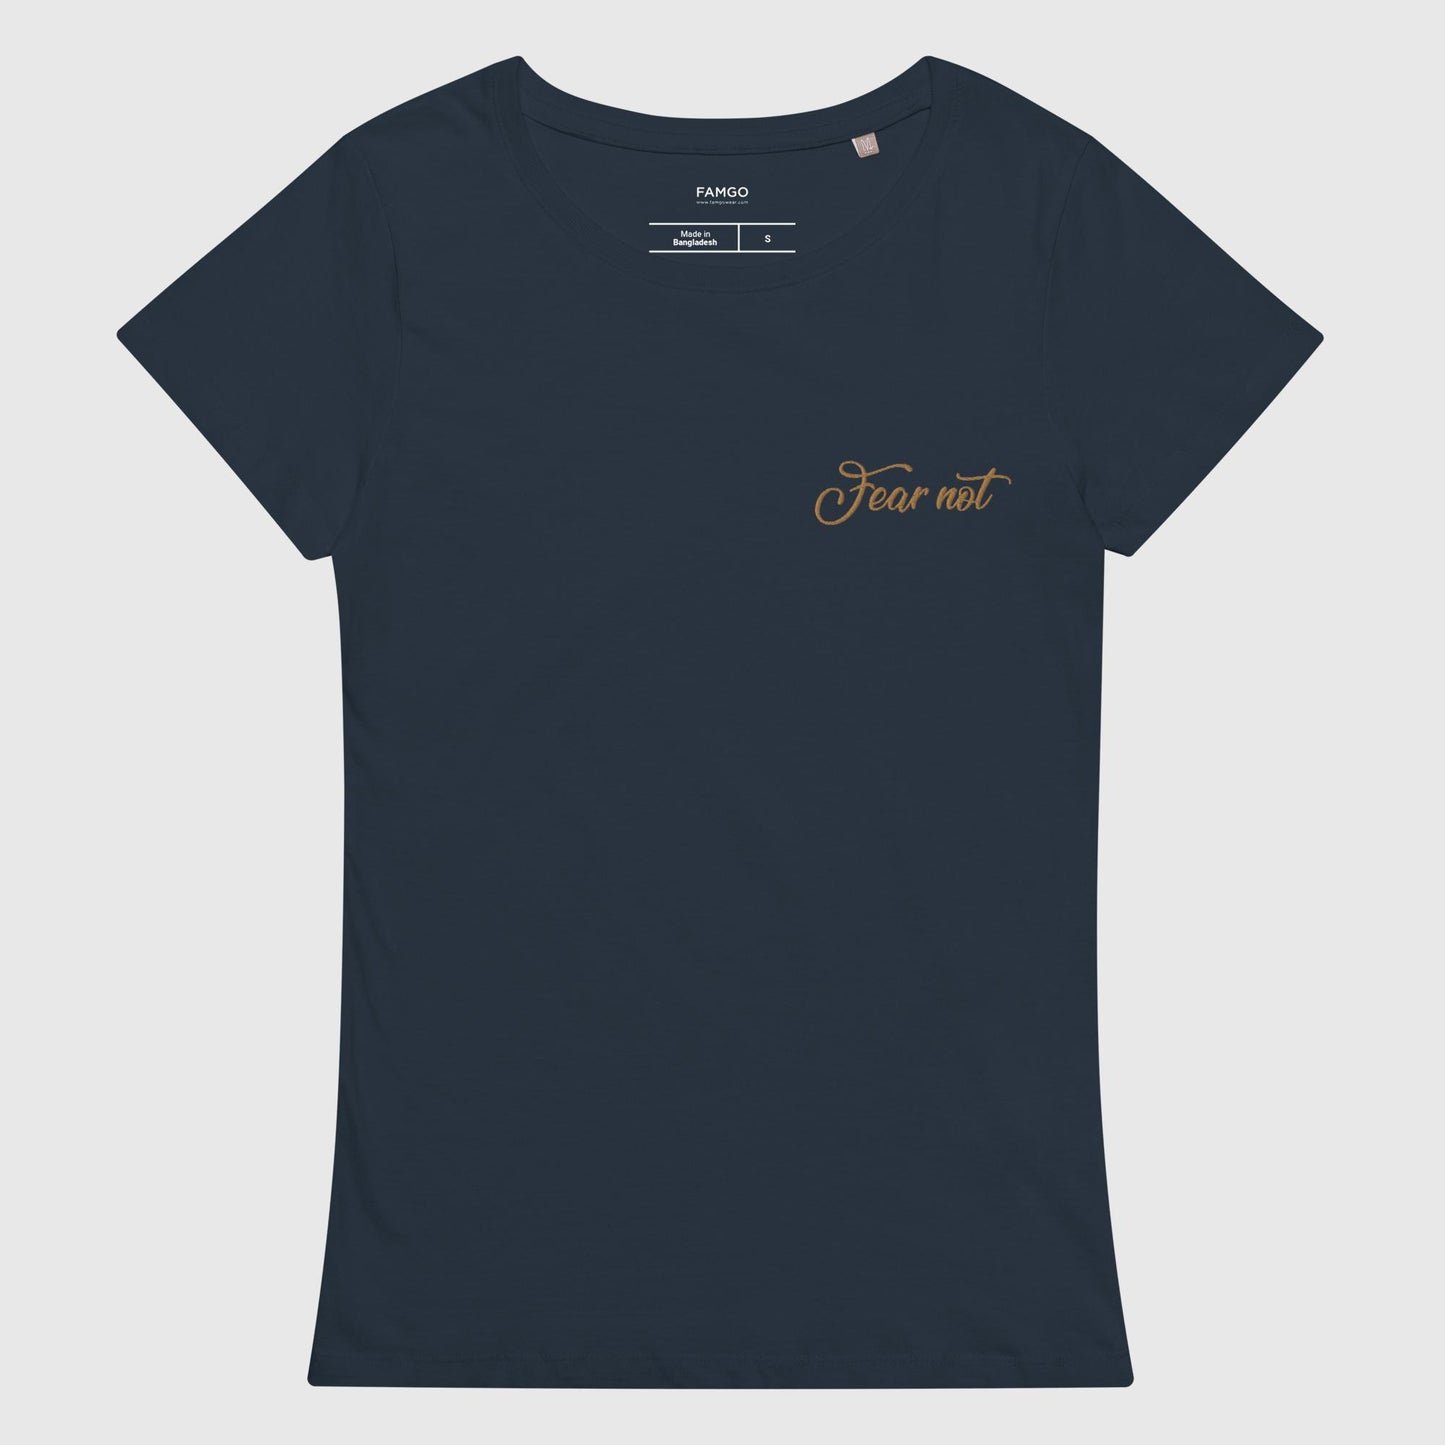 Women's french navy organic cotton t-shirt that features the inspirational quote, "Fear Not."